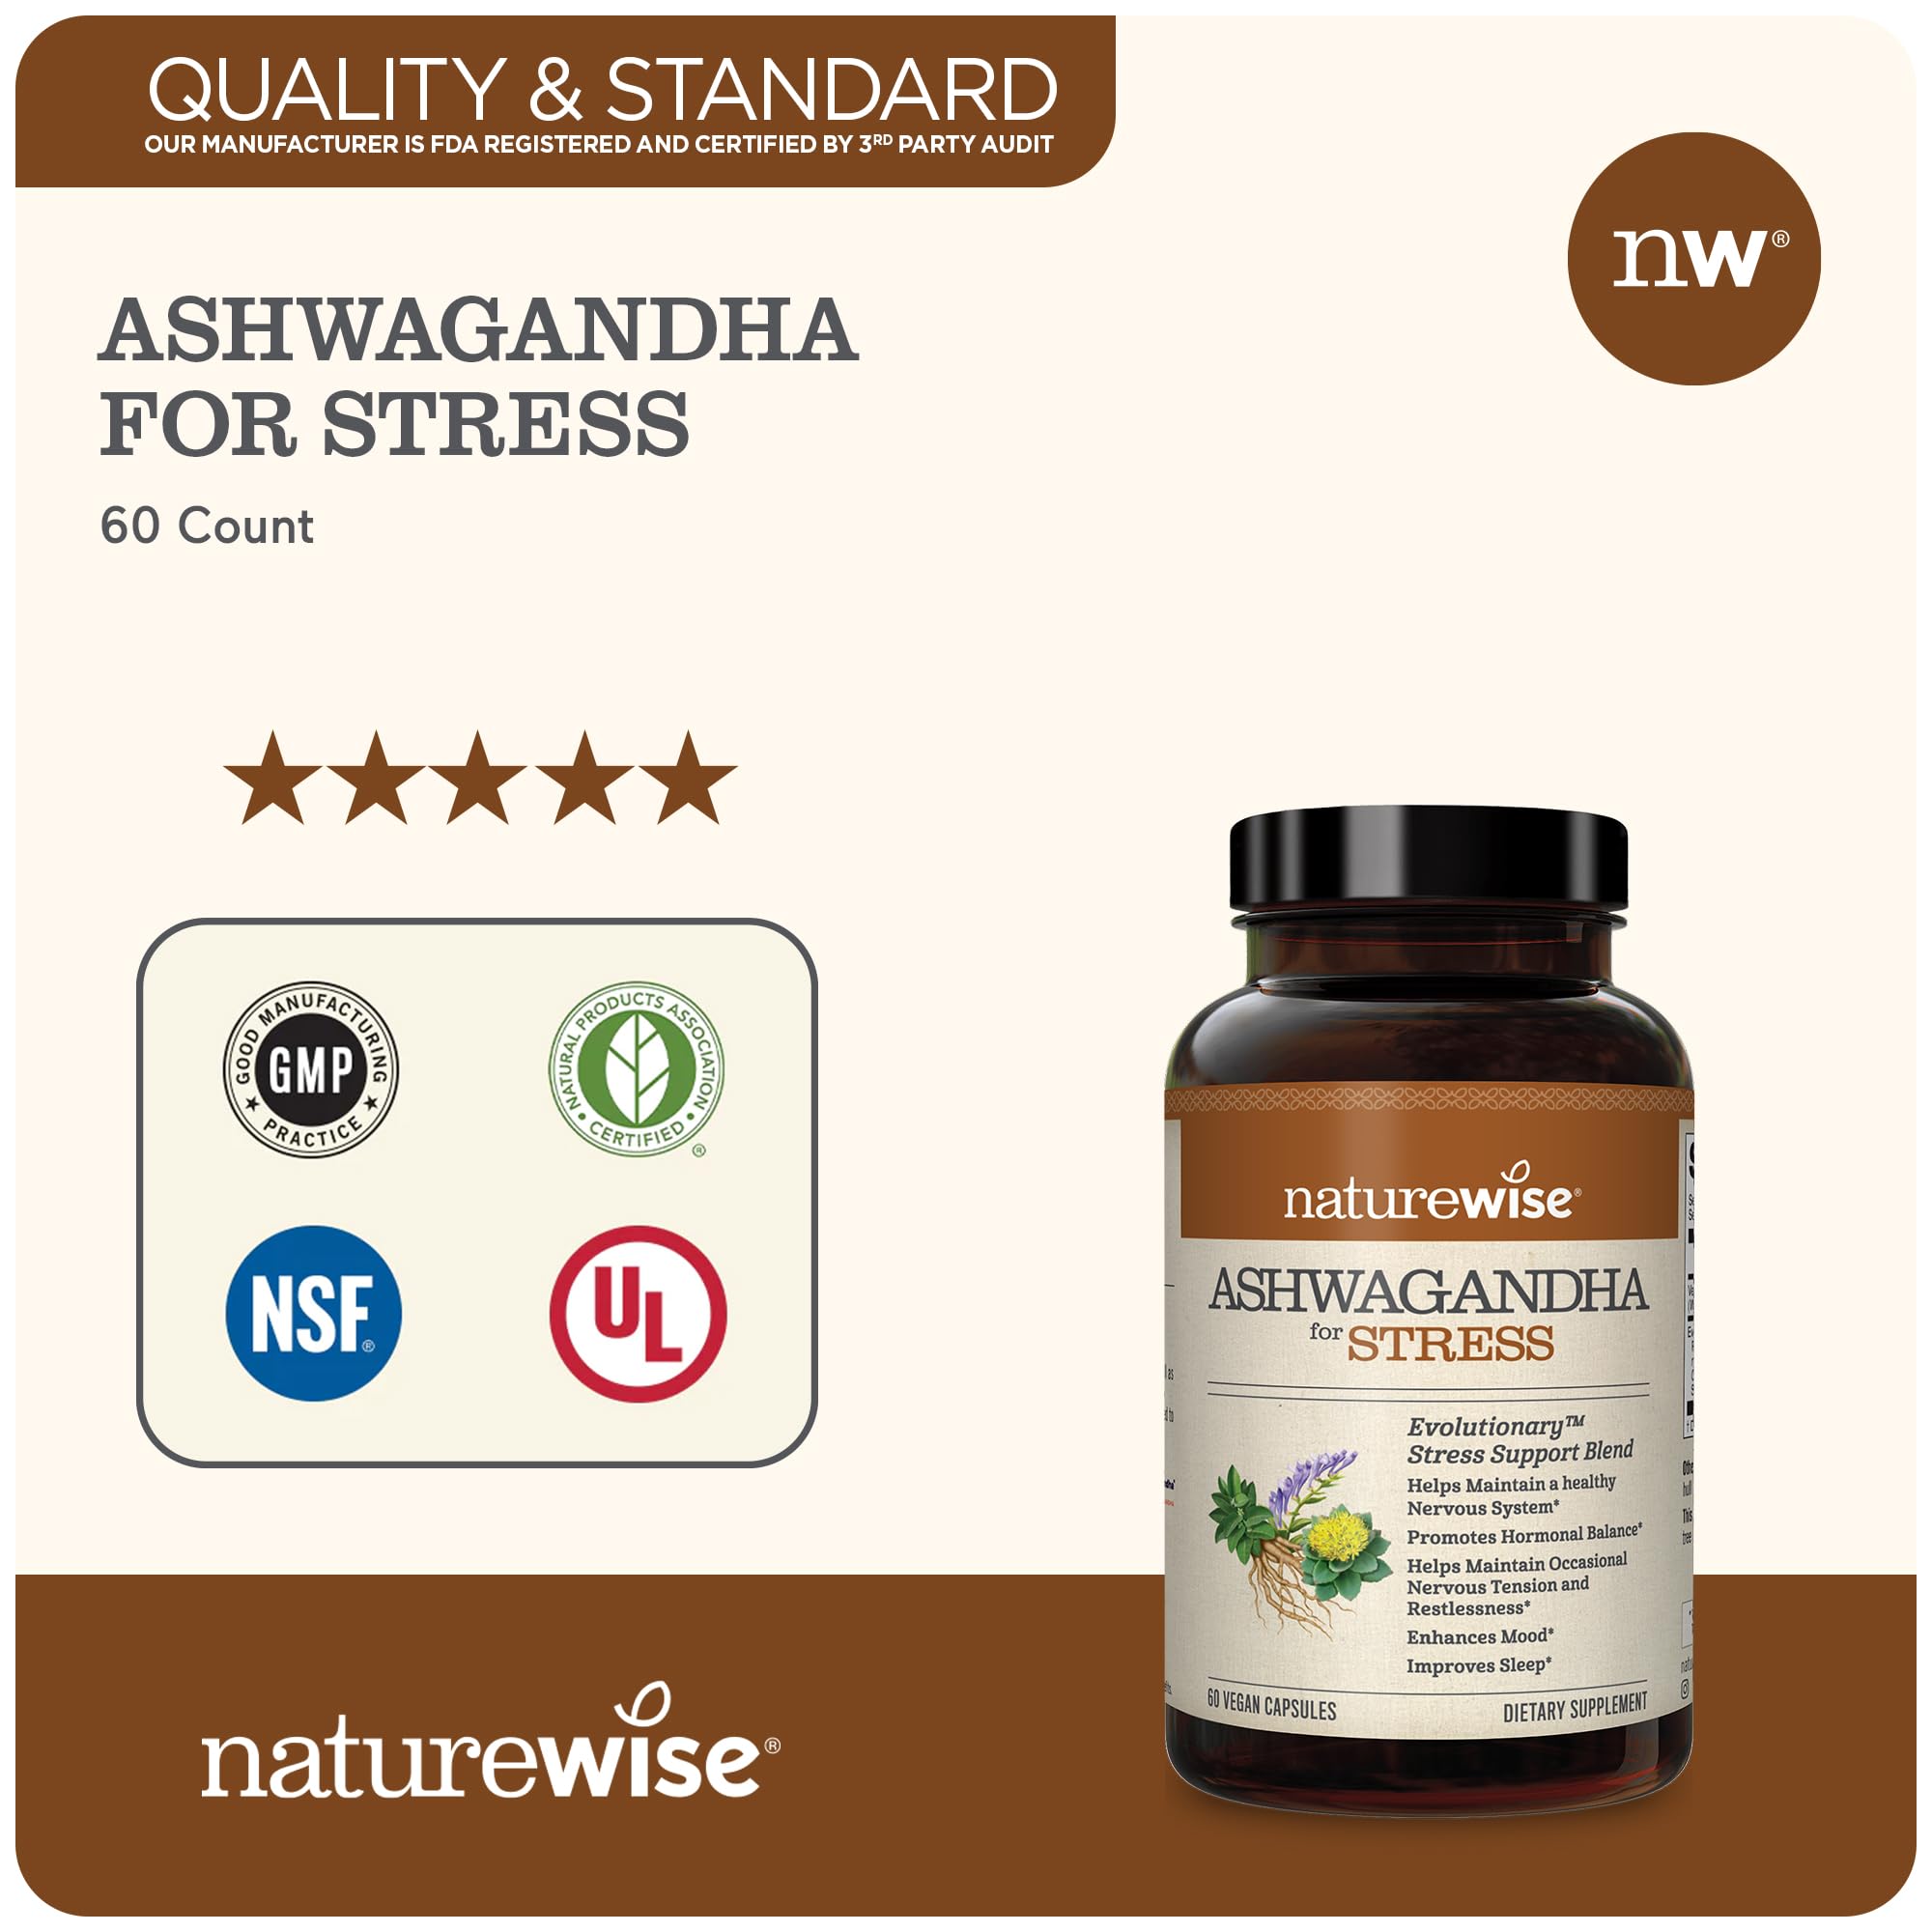 NatureWise Ashwagandha for Stress | Calming KSM-66 Herbal Supplement Extract + GABA, L-Theanine, Rhodiola Rosea, Light Brown, 60 Count